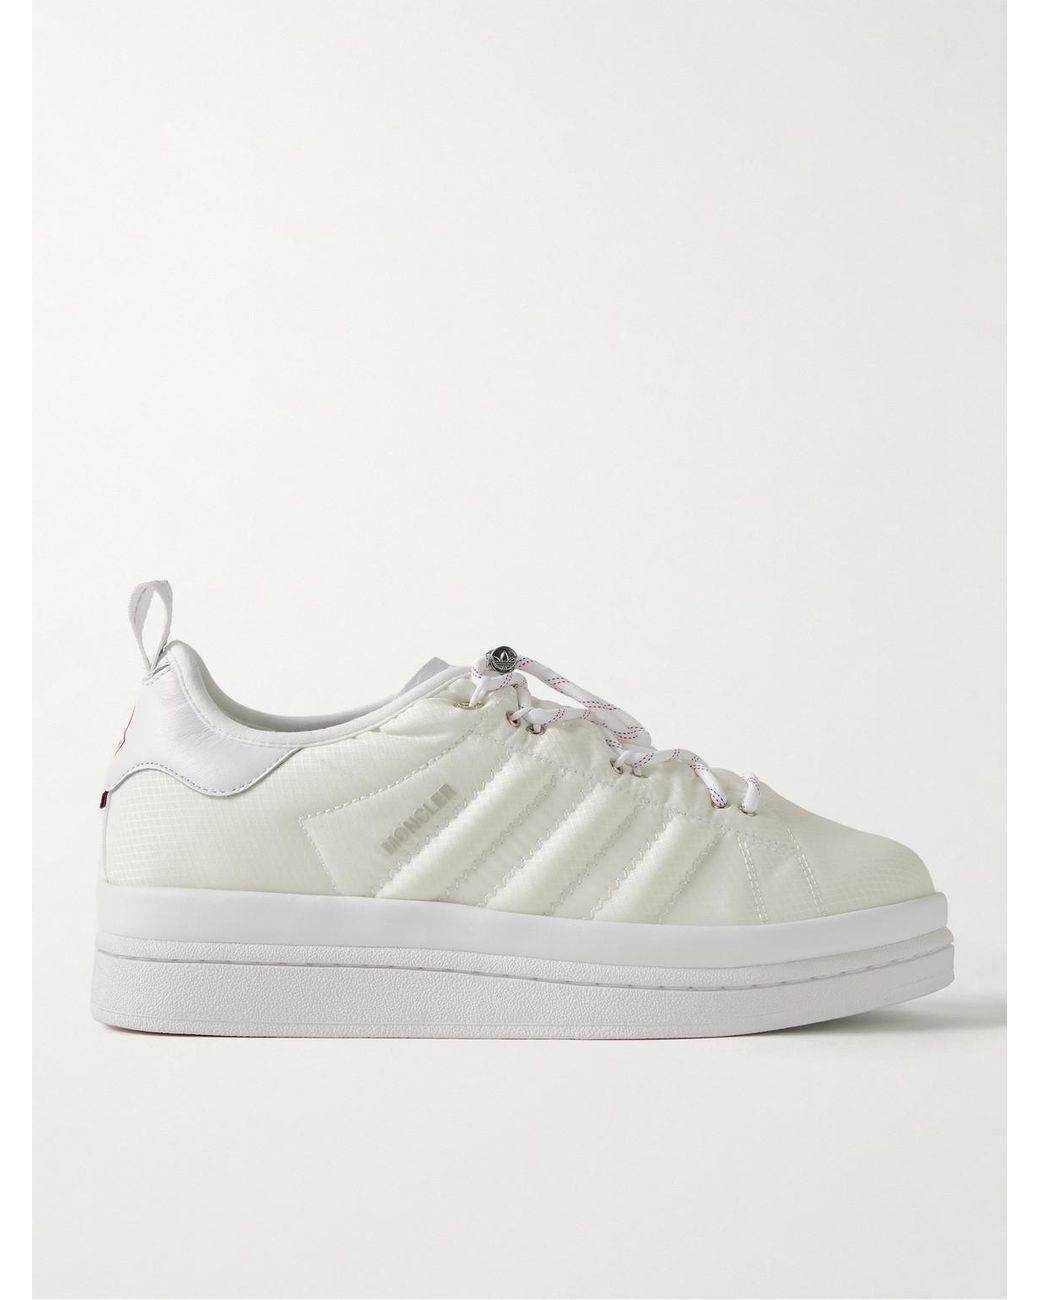 Moncler Genius Adidas Originals Campus Leather-trimmed Quilted Gore-textm  Sneakers in White for Men | Lyst Canada